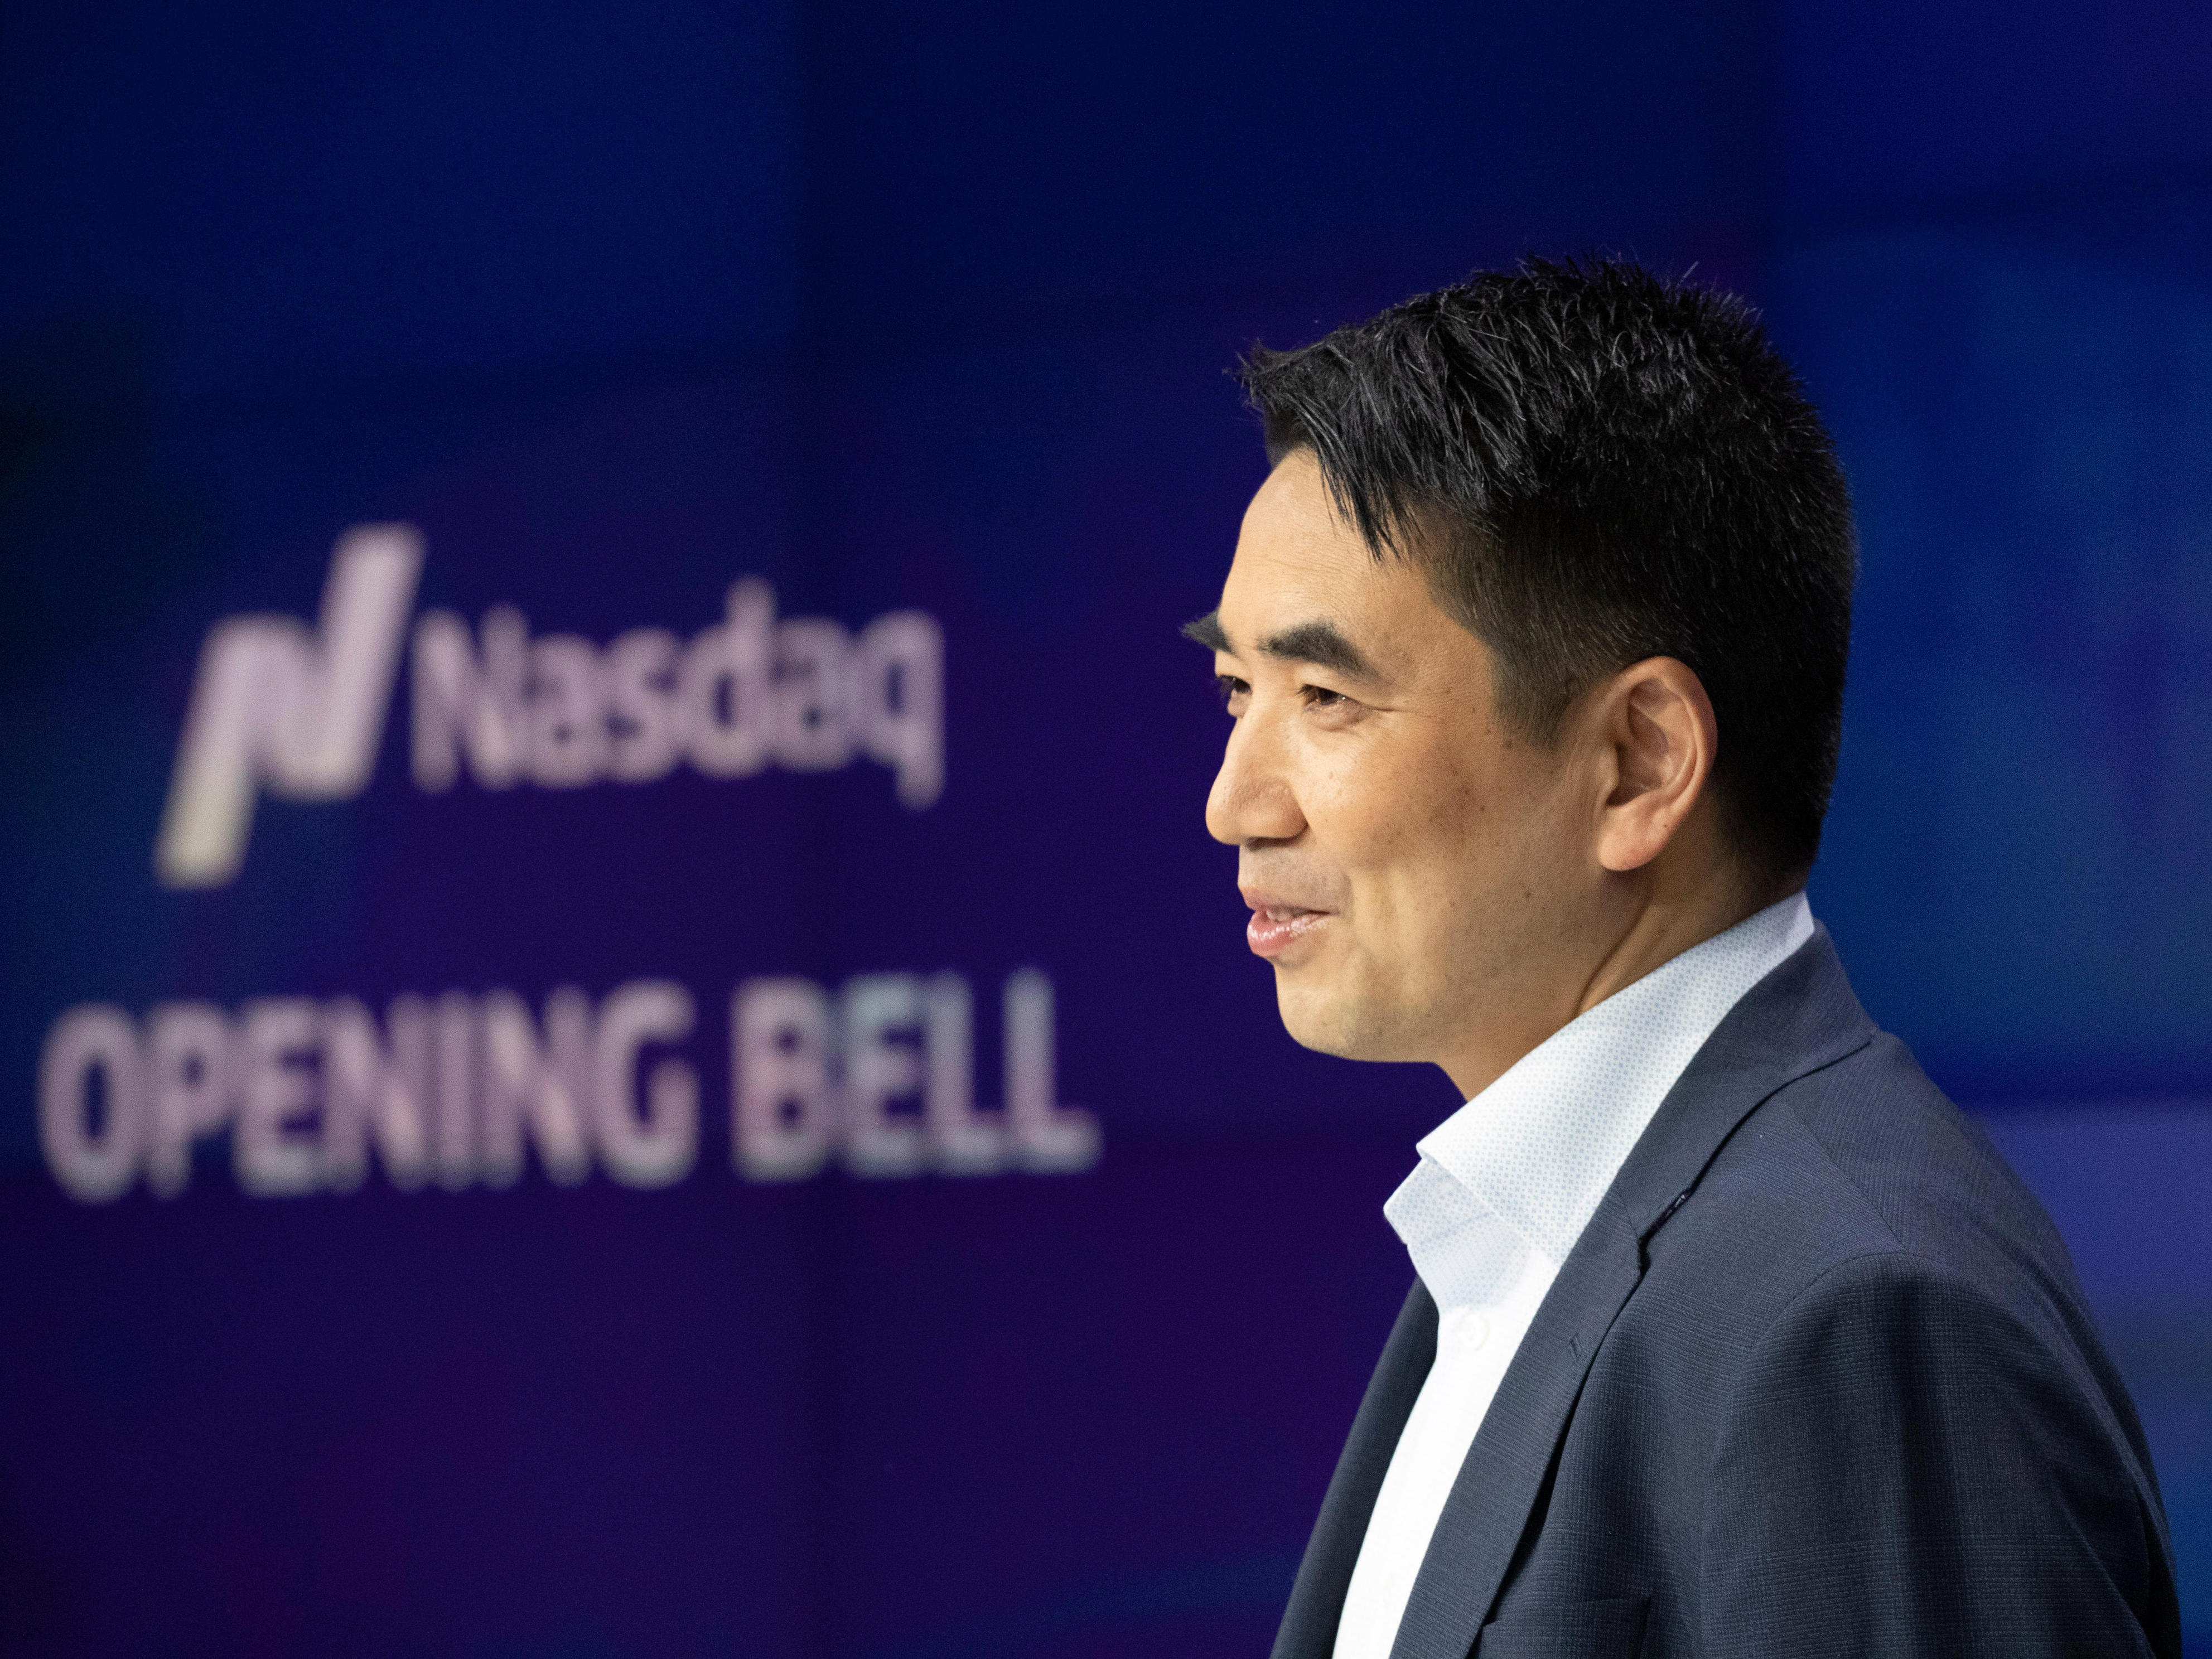 <p>Zoom CEO Eric Yuan announced <a href="https://blog.zoom.us/a-message-from-eric-yuan-ceo-of-zoom/" rel="noopener">in a memo</a> to workers that the company would reduce its headcount by 15%, or about 1,300 employees, on Feb 7. </p><p>He attributed the layoffs to "the uncertainty of the global economy and its effect on our customers" but also said the company "made mistakes" as it grew. </p><p>"We didn't take as much time as we should have to thoroughly analyze our teams or assess if we were growing sustainably toward the highest priorities," Yuan said. </p><p>In the memo, Yuan also announced that he would cut his salary by 98% in 2023 and forgo his corporate bonus. In addition, other members of the executive leadership team will also reduce their base salaries by 20% this year, according to Yuan. </p>